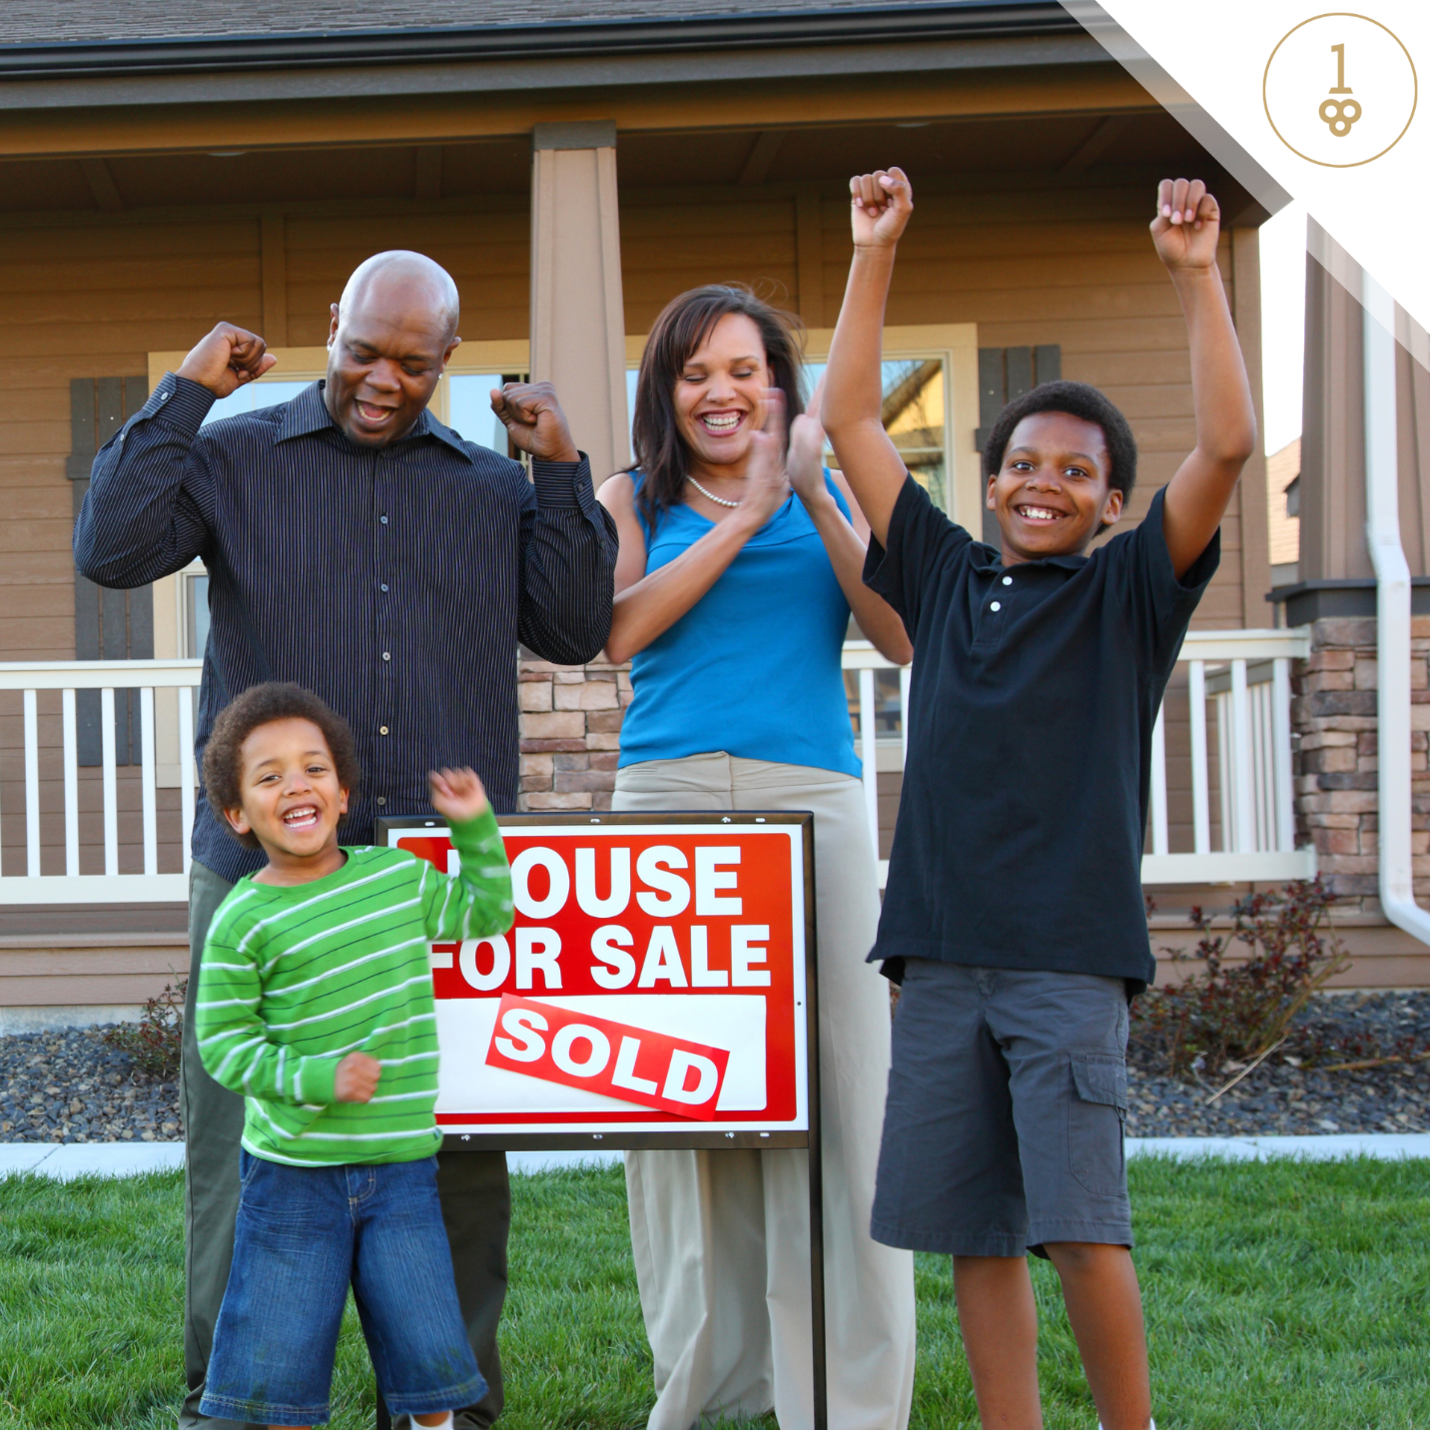 A family stands in front of a house for sale sign